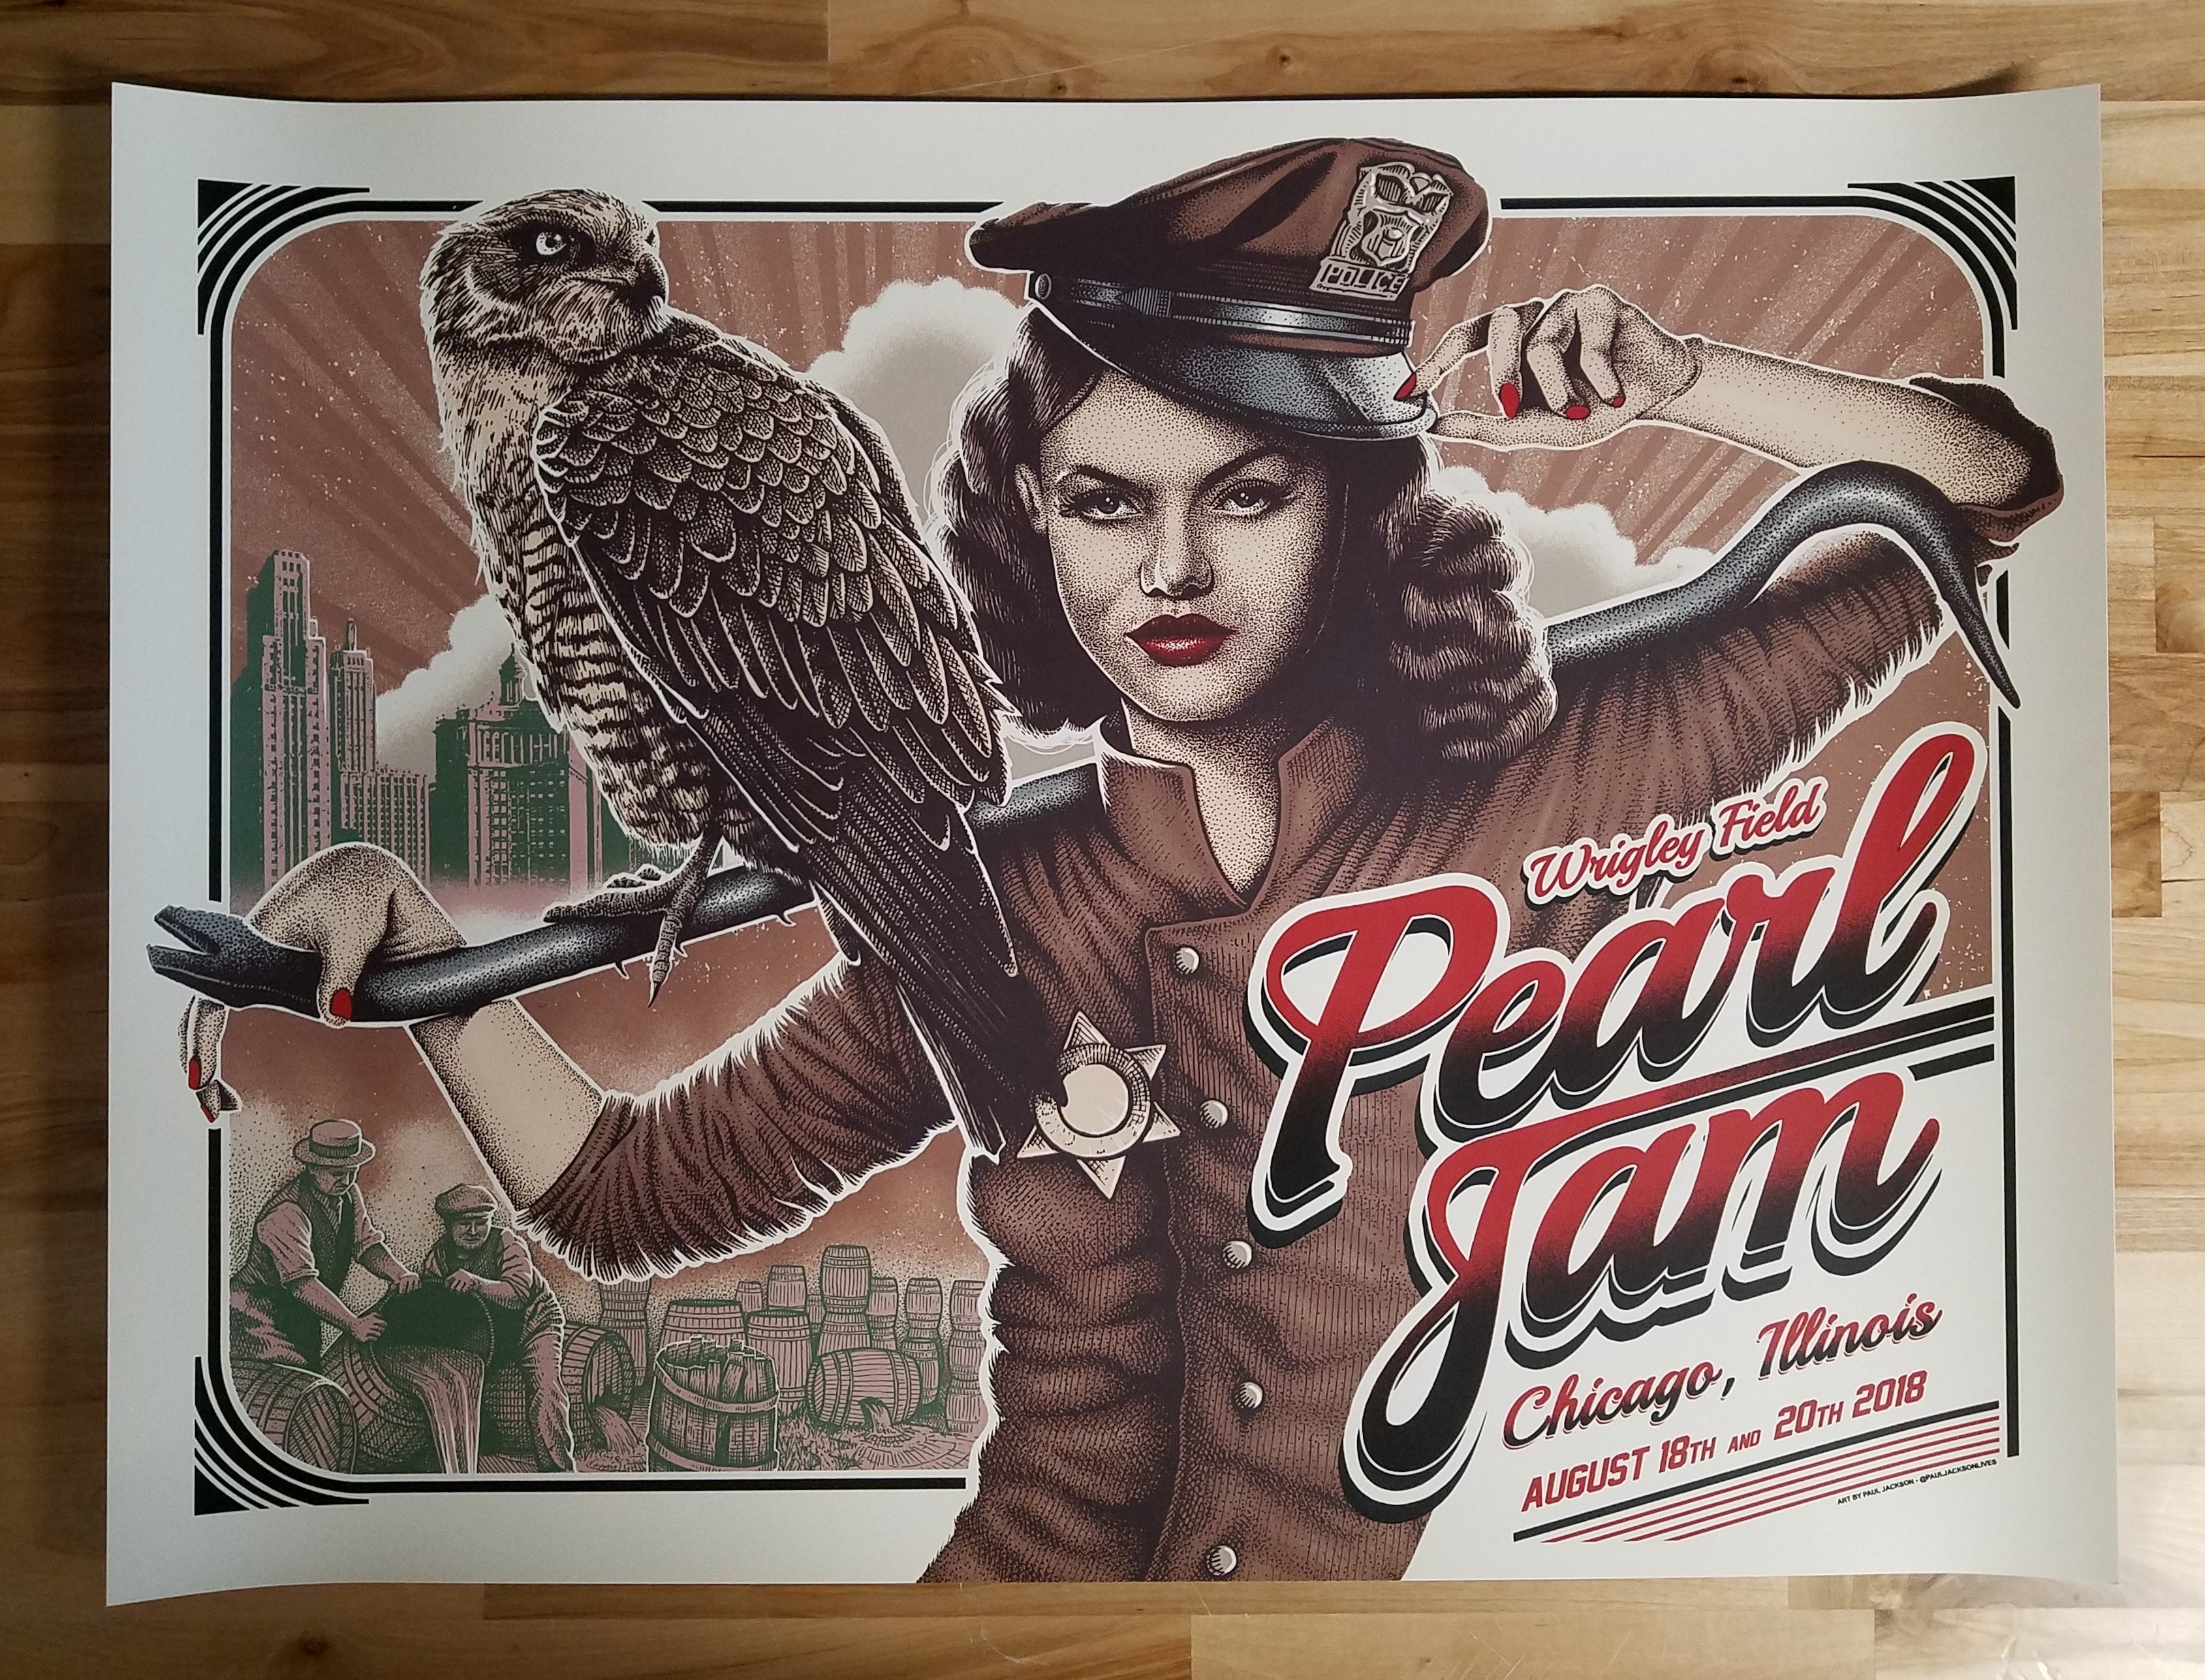 Title:  Pearl Jam Bros Wrigley Field - 2018  Artist:  Paul Jackson  Edition:  Released on August 16, 2018. Wrigley Field Merch Tent Edition, not signed or numbered.  Type: Screen print poster  Size: 24" x 18" inches  Location:  Chicago, IL  Venue: Wrigley Field  Notes:  Very Good Condition.  Created by the artist Paul Jackson for the two Wrigley Field shows taking place on August 18th & August 20th, 2018.  Check out our other listings for more hard to find and out of print posters.